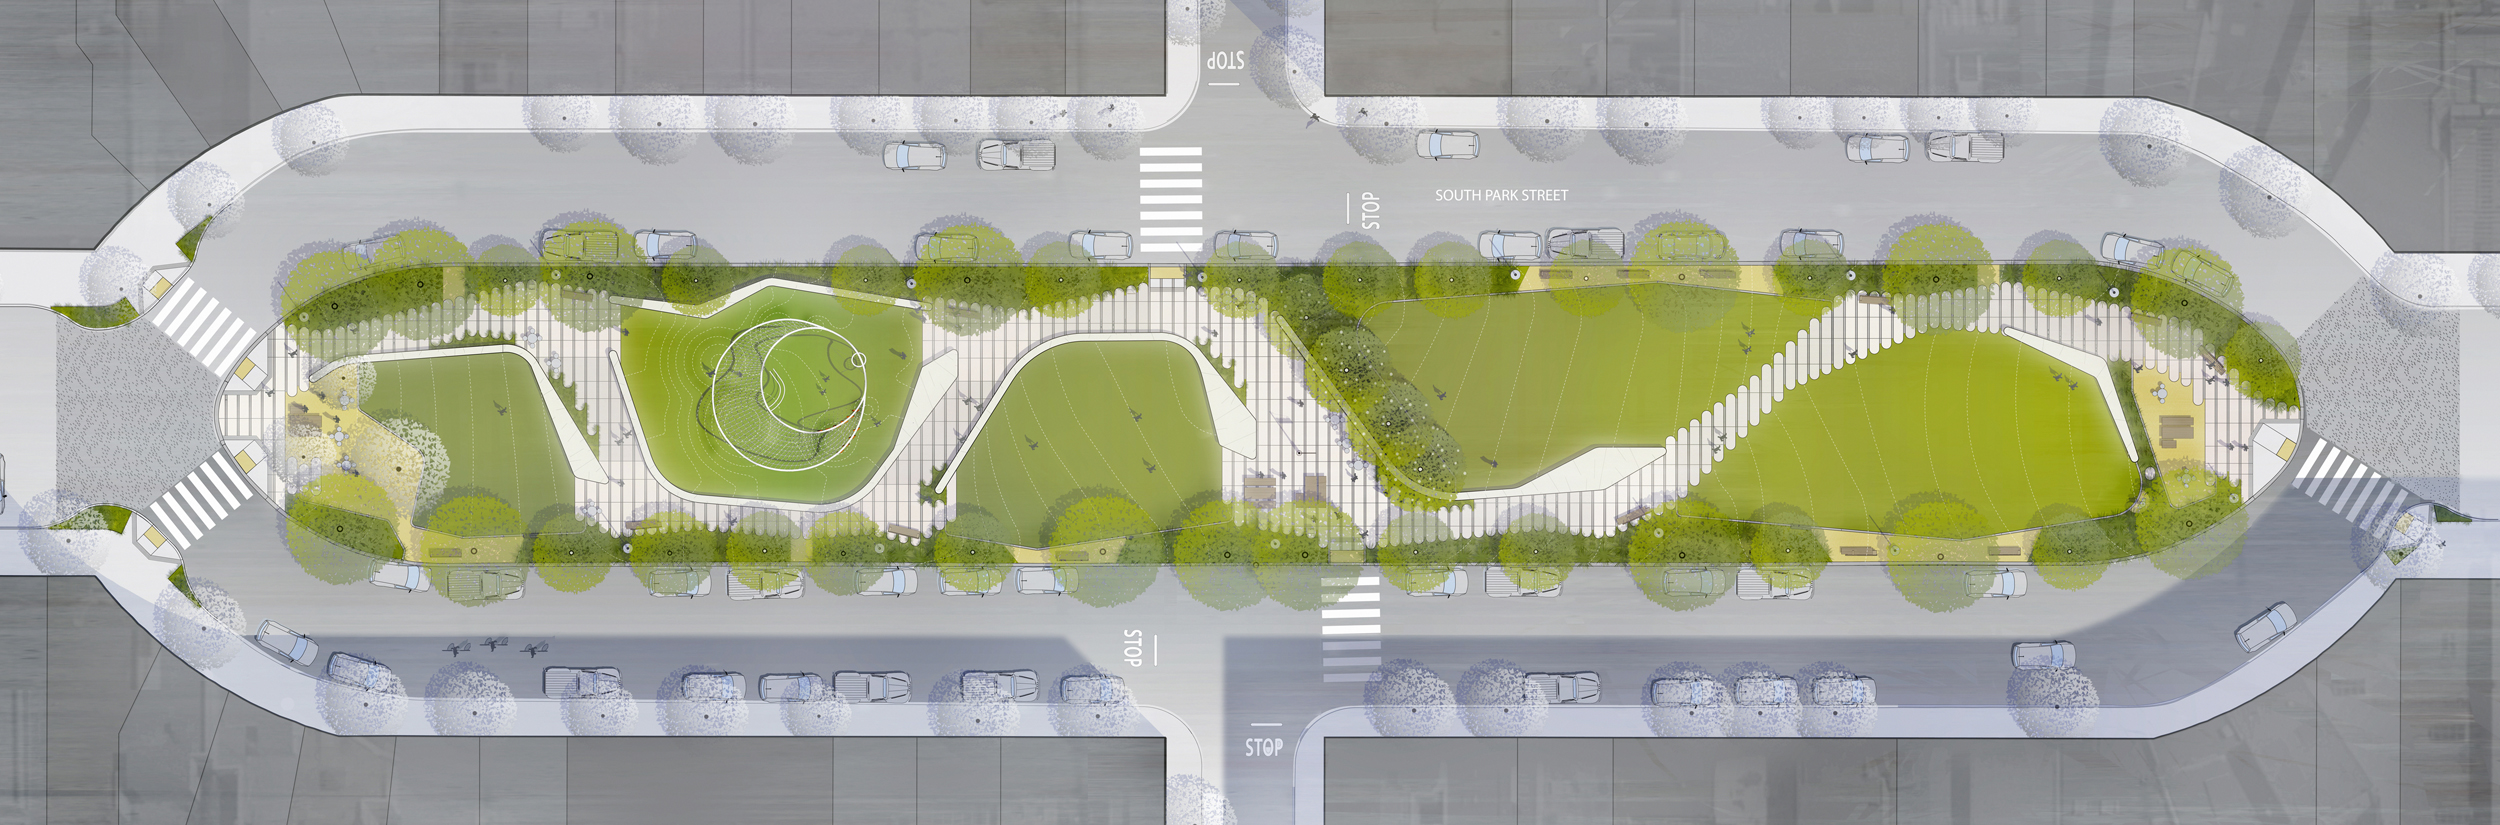 The design of the park utilises a 'path finding' tool which uses data collected on site to draw the path towards important areas.